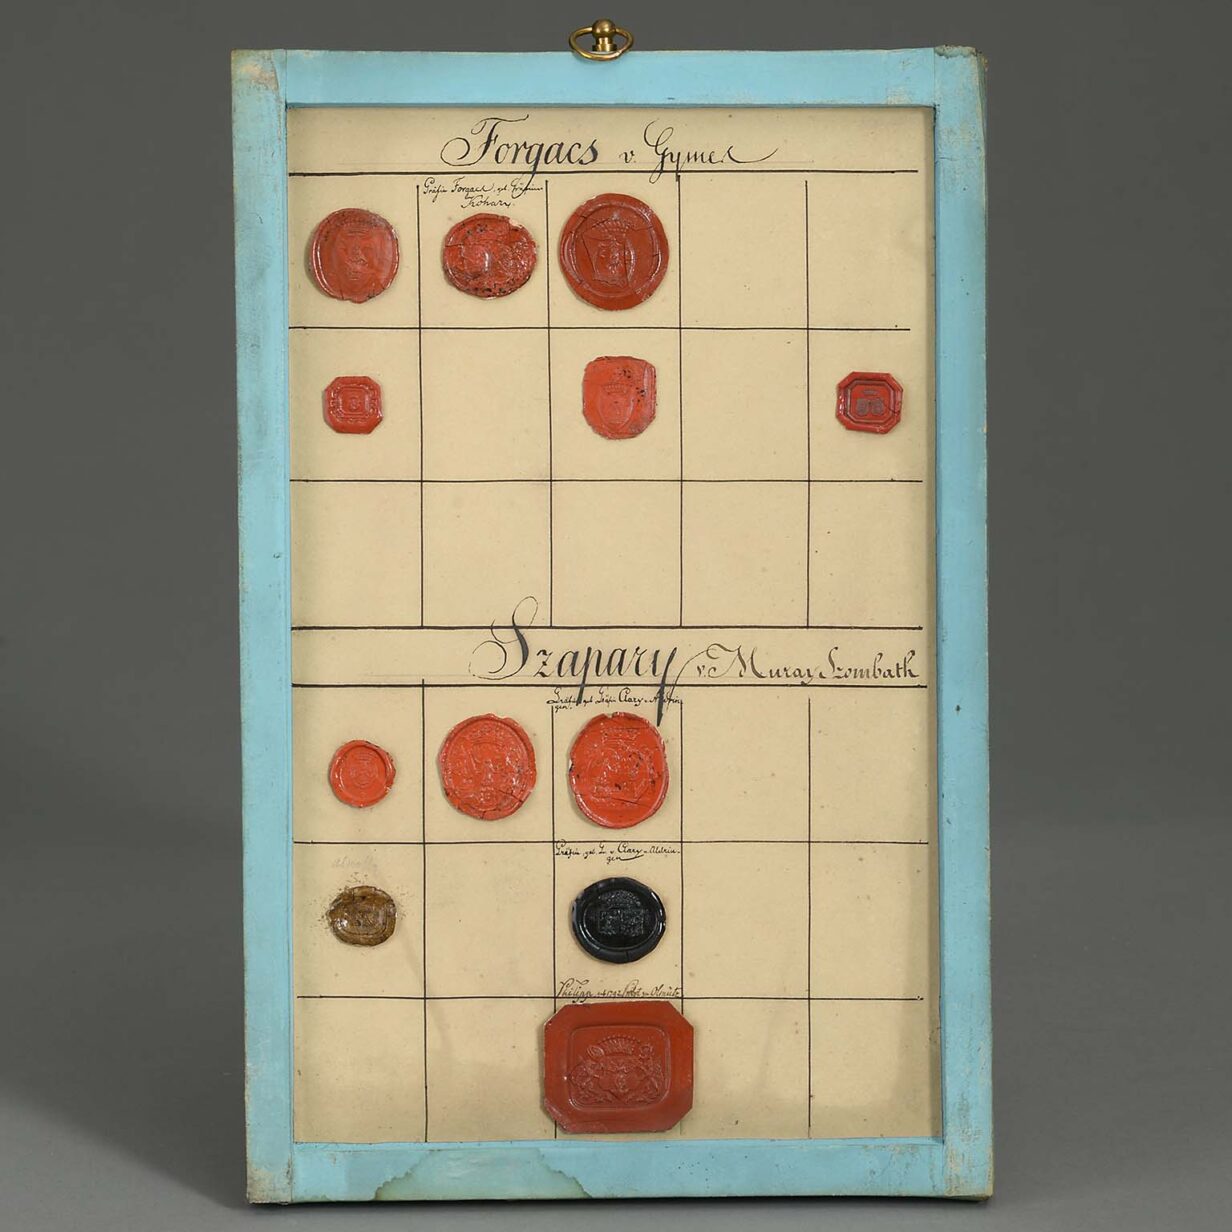 Group of four 18th century panels containing heraldic wax seals